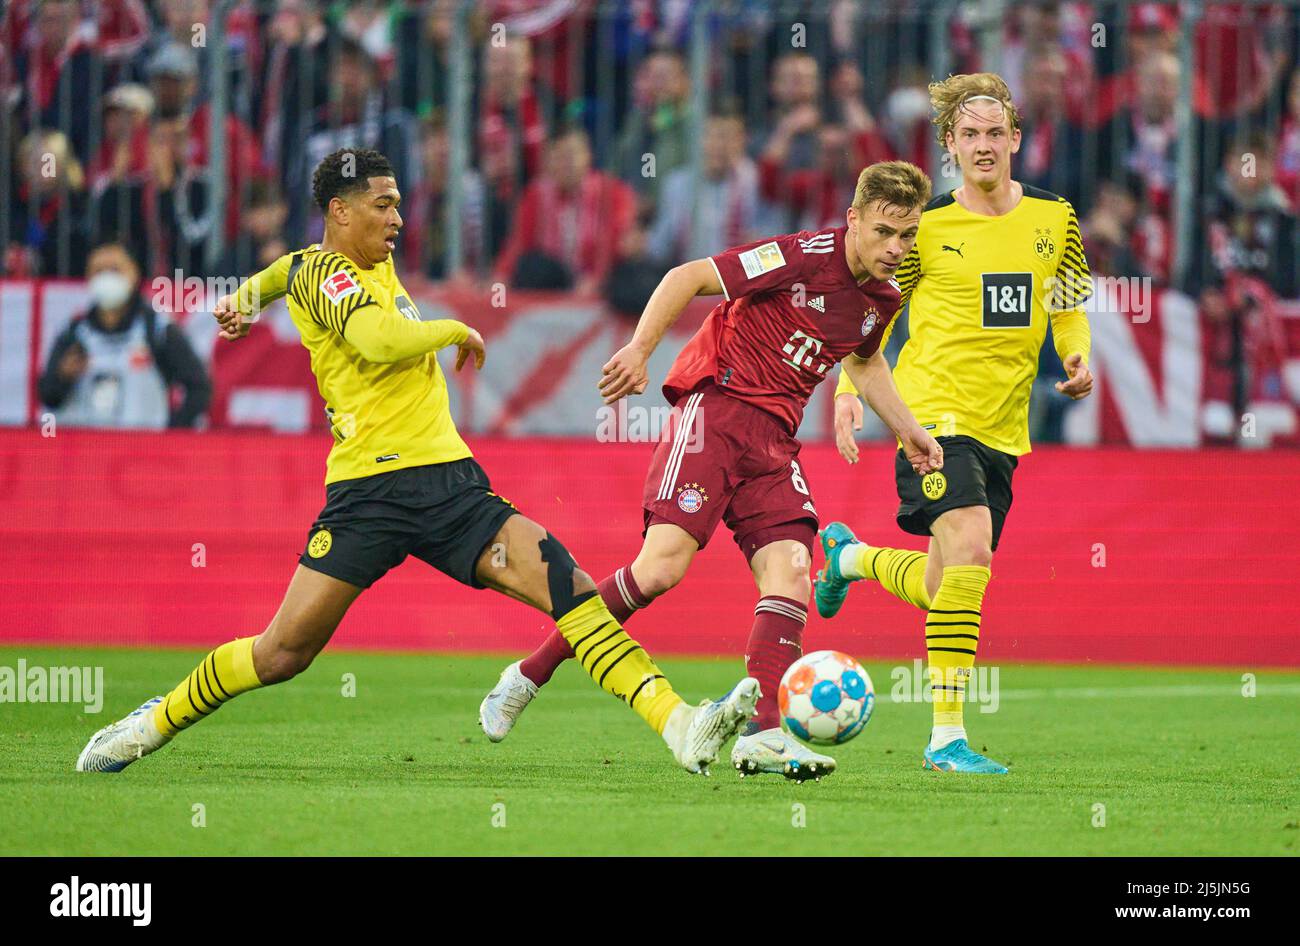 Joshua KIMMICH, FCB 6 compete for the ball, tackling, duel, header,  zweikampf, action, fight against Jude BELLINGHAM , Nr. 22 BVB Julian  BRANDT, BVB 19 in the match FC BAYERN MÜNCHEN -